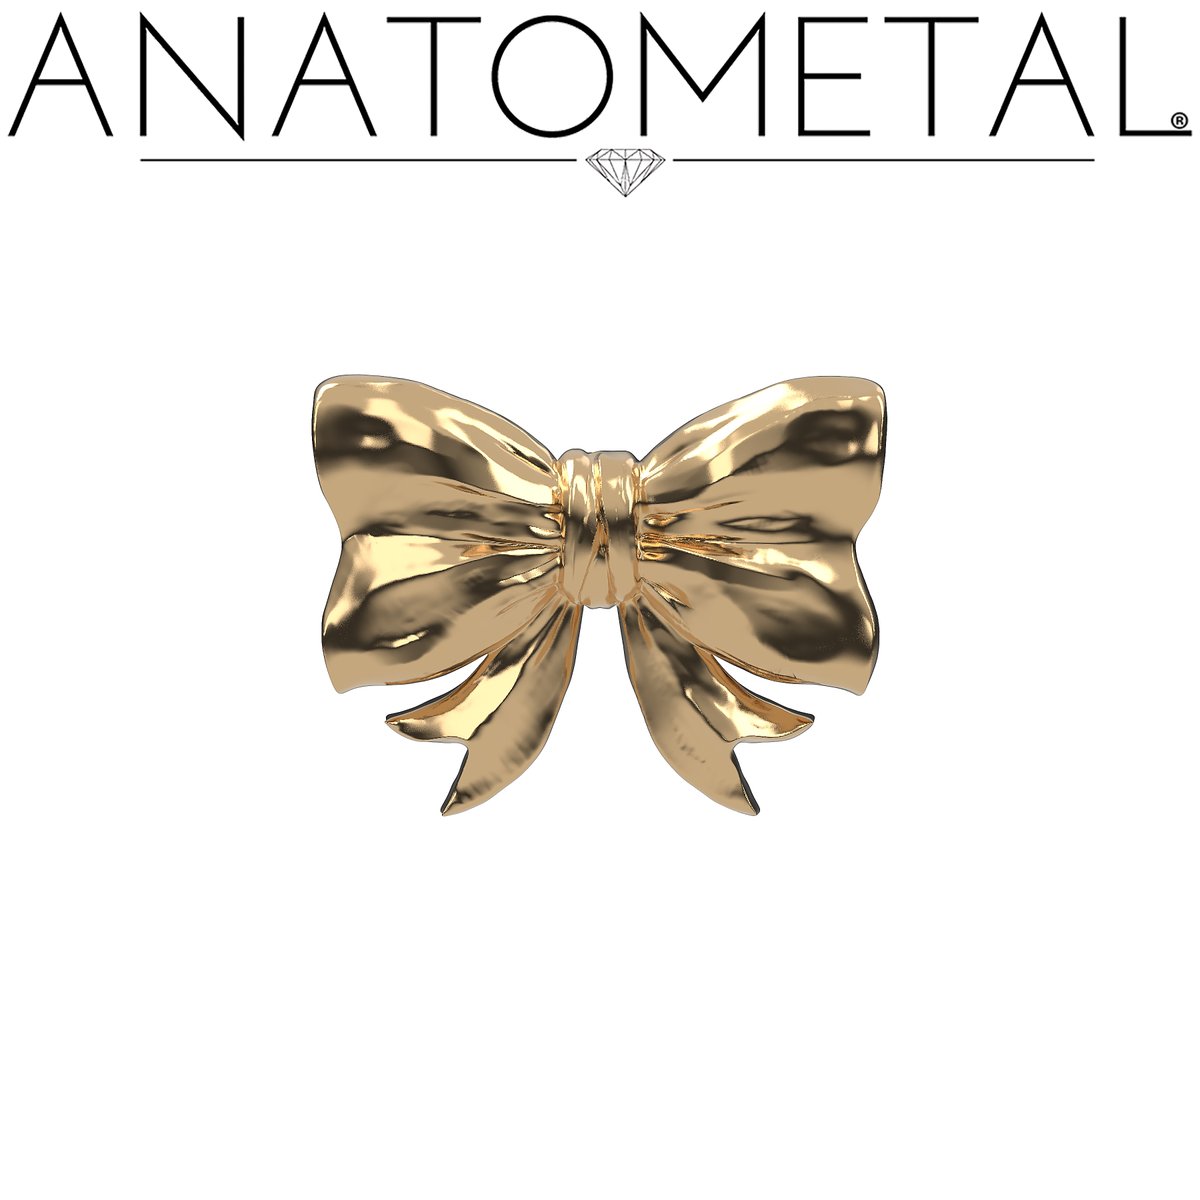 Get Bow-ed Over by Elegance: Discover Our Stunning Bow-Shaped  Collection! 🎀. 

#anatometal #jewelry #GOLD #18K #piercing #bodypiercing #safepiercing #madeinsantacruz